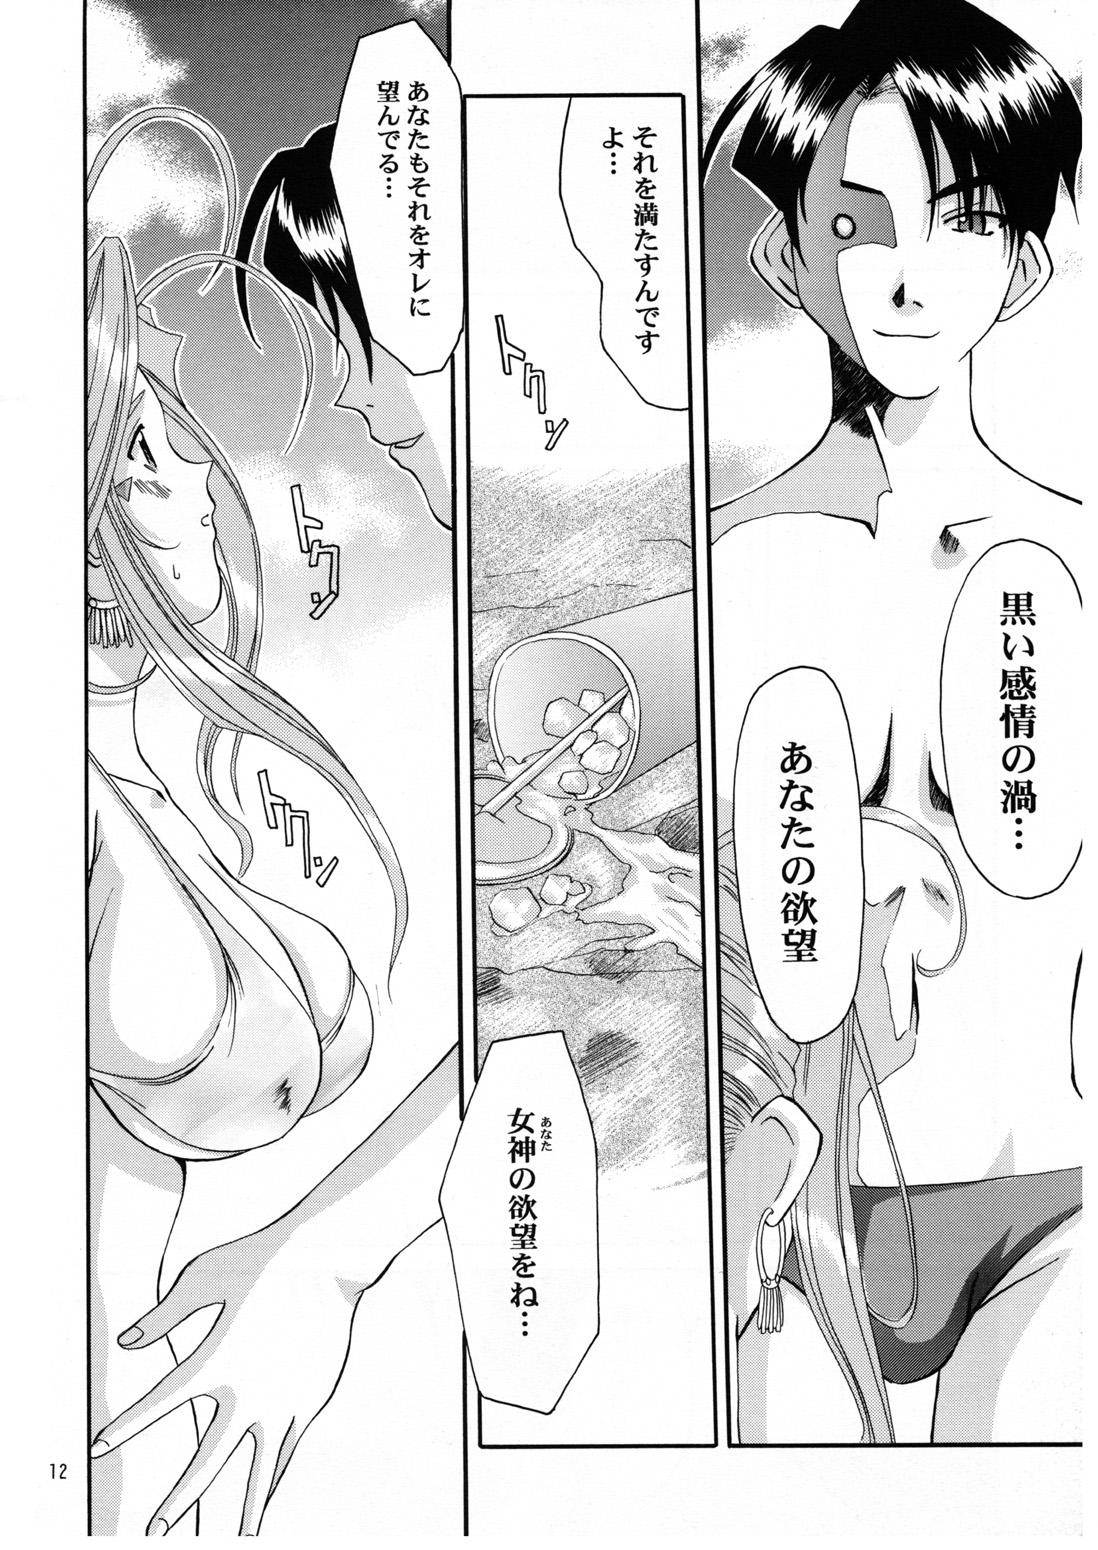 With Nightmare of My Goddess Summer Interval - Ah my goddess Gay Blowjob - Page 12